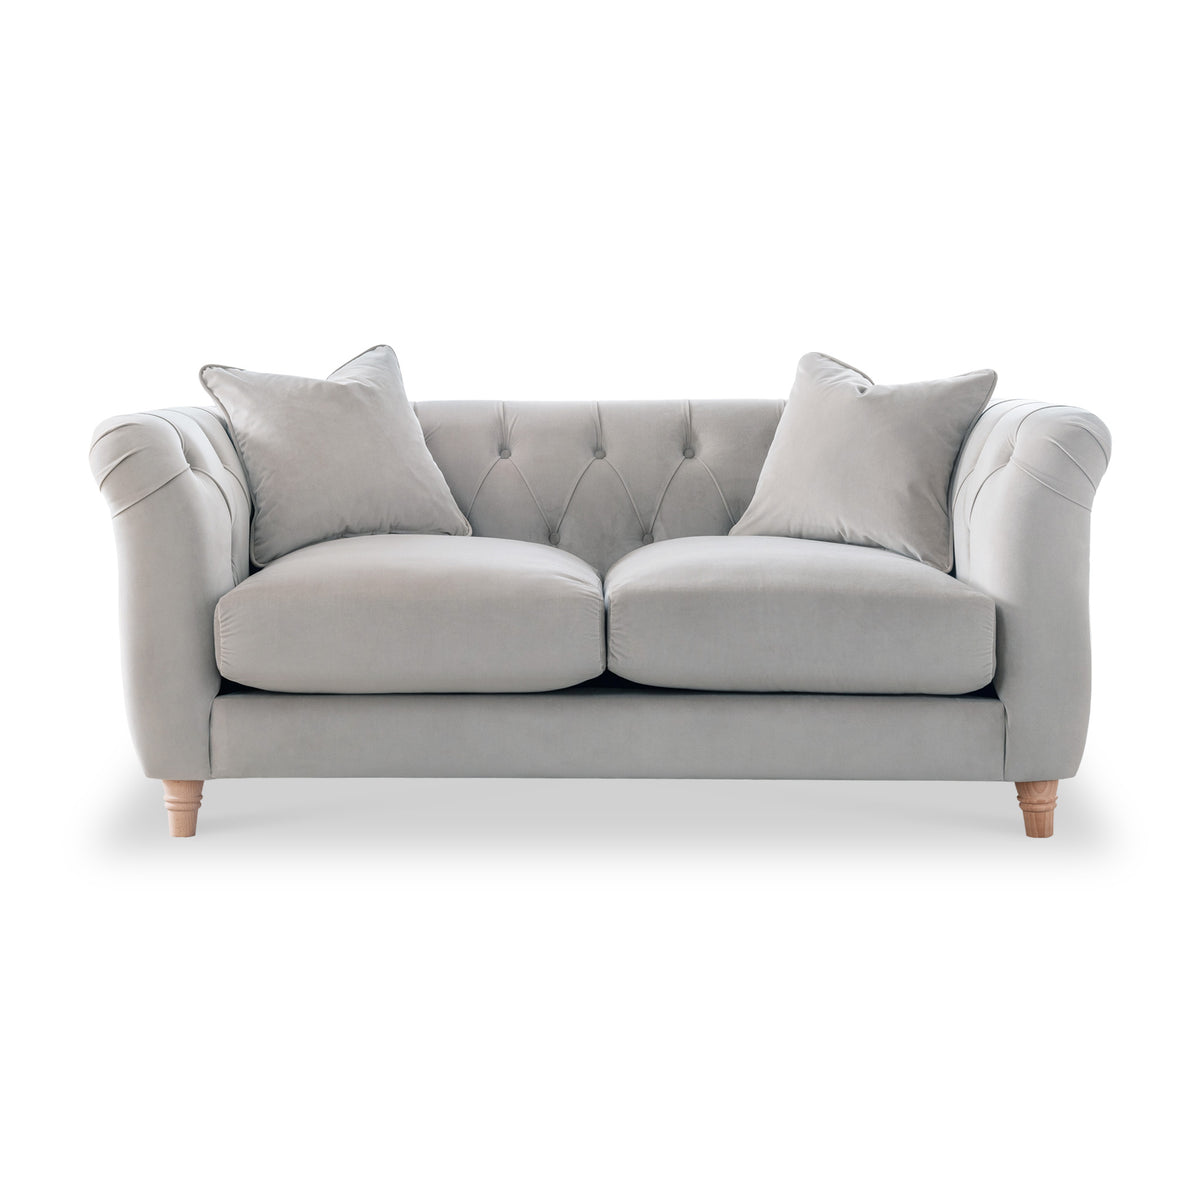 Clarence Putty Velvet Chesterfield 2 Seater Sofa from Roseland Furniture